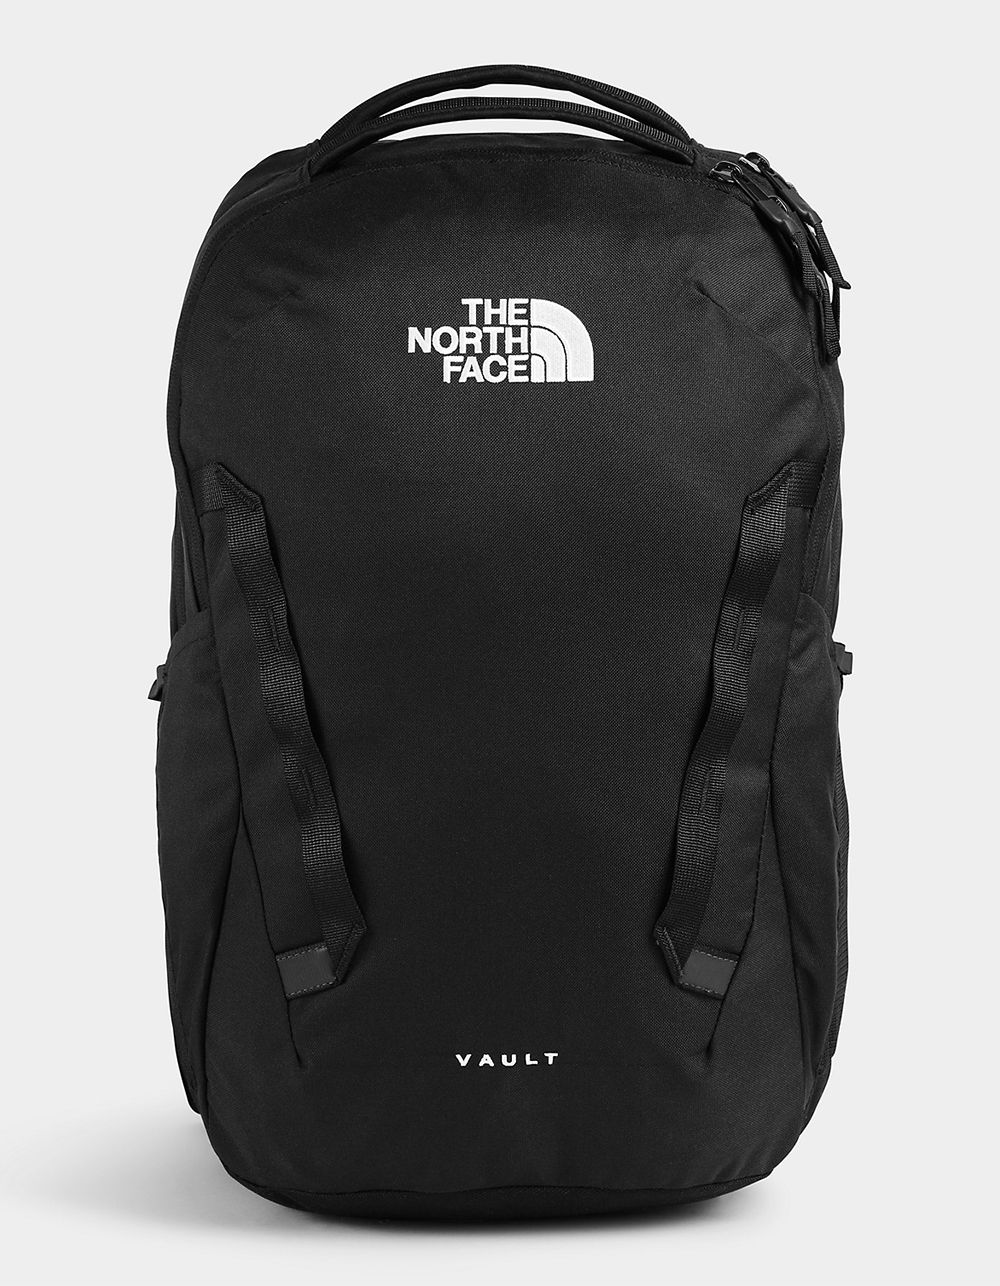 THE NORTH FACE Vault Backpack | Tillys